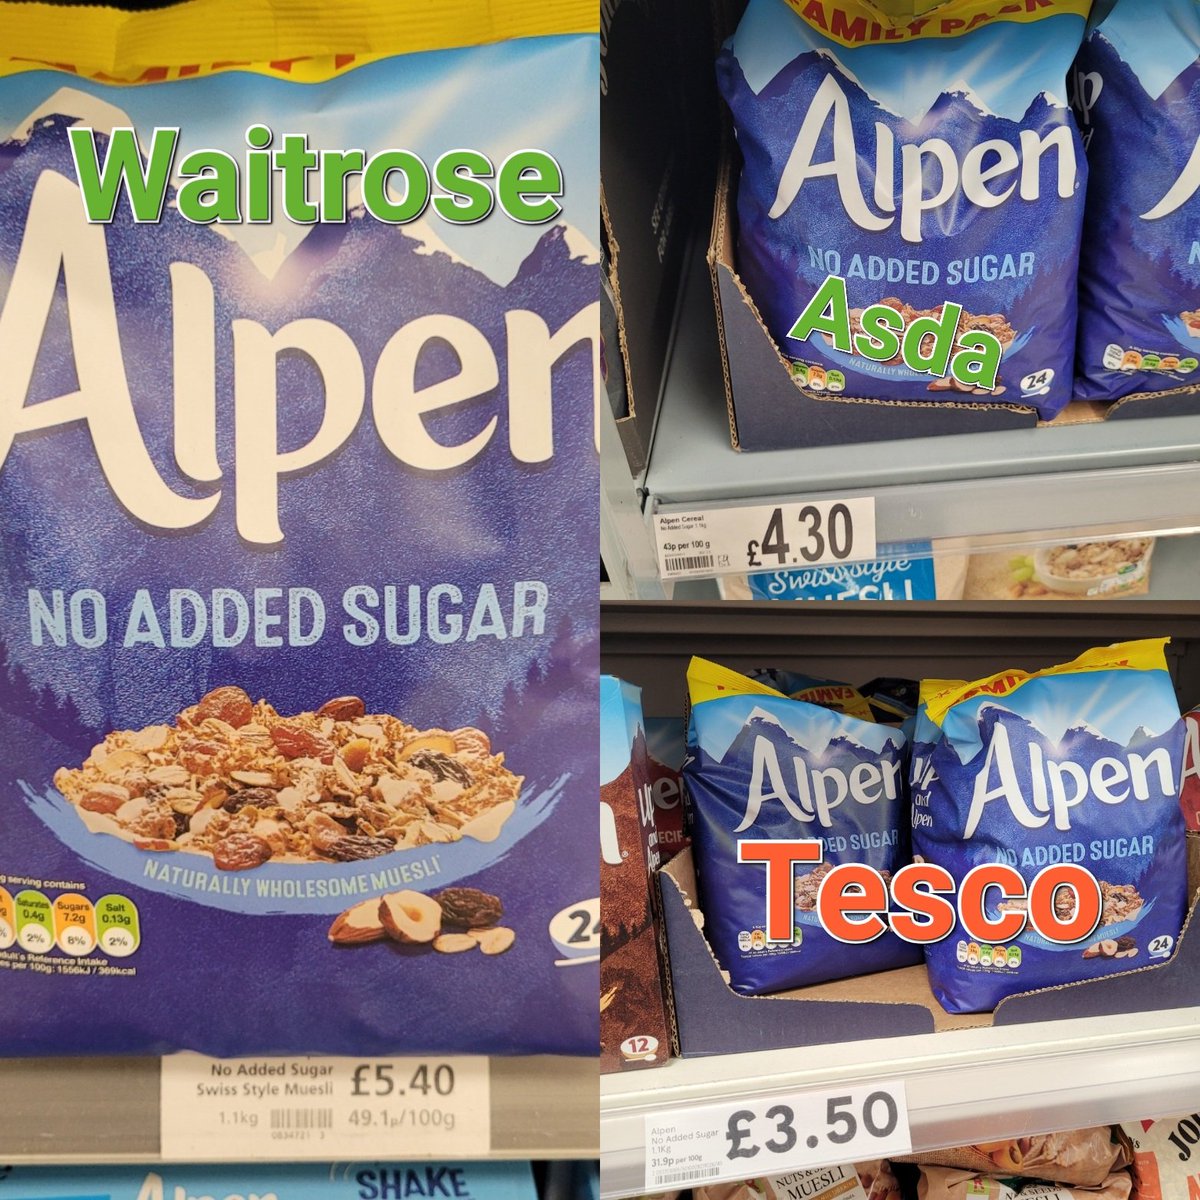 All taken in the course of one week.

Ever get the feeling we are being ripped-off? What do you think @weetabix ? 

#CostOfLivingCrisis #supermarketprices #alpen